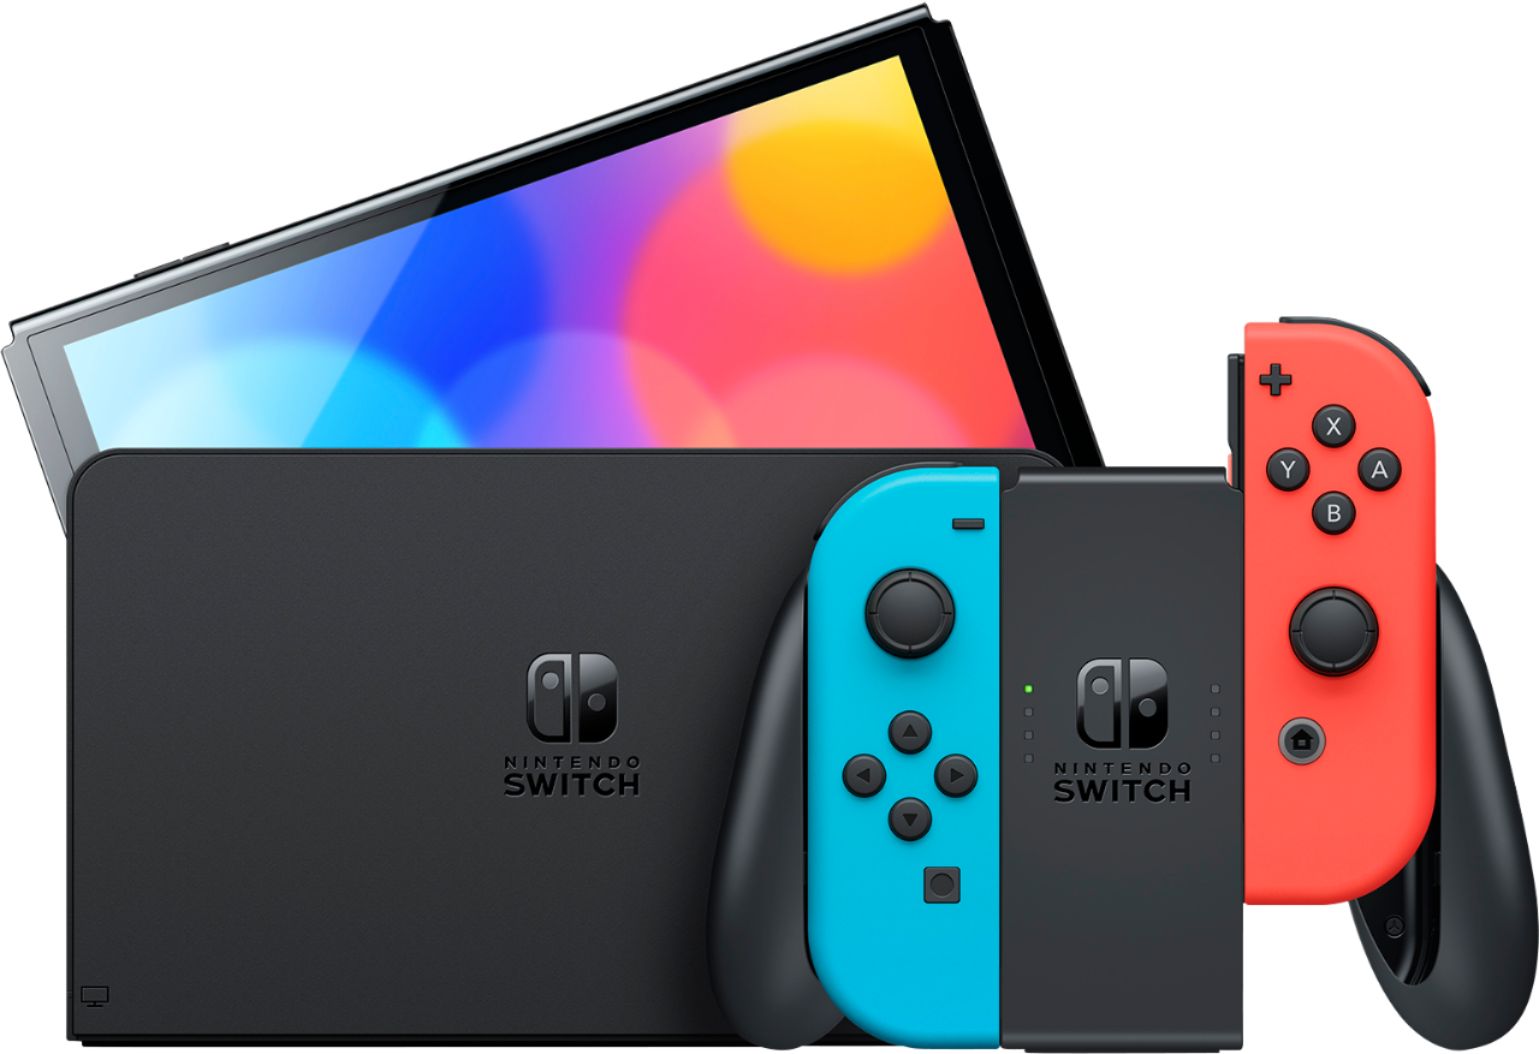 2022 New Nintendo Switch OLED Model Neon Red & Blue Joy Con 64GB Console HD Screen & LAN-Port Dock with Super Bomberman R, Mytrix 128GB MicroSD Card and Accessories